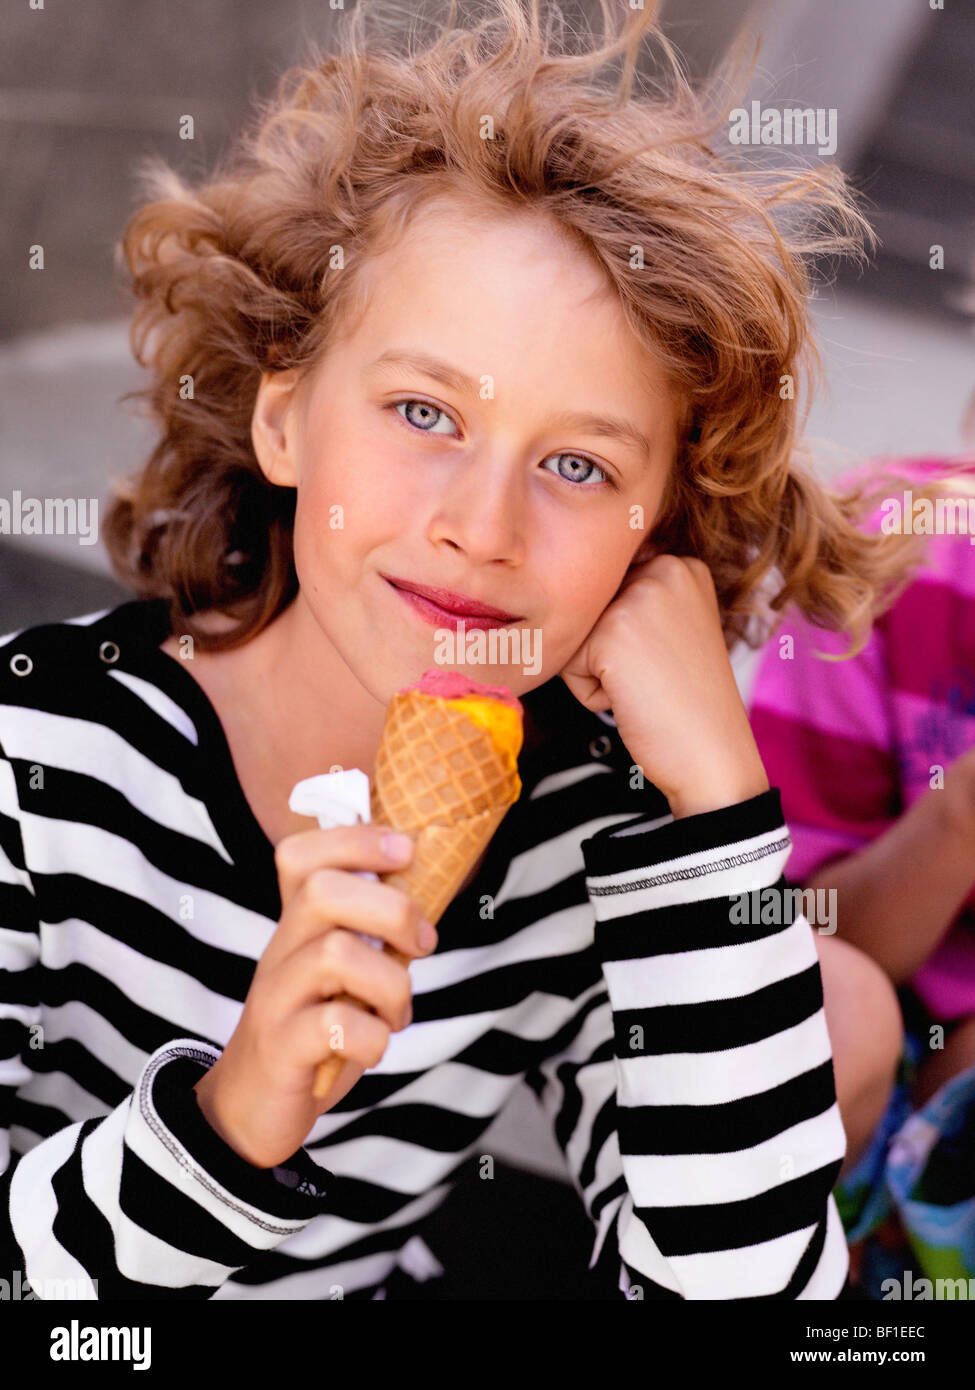 Boy with an ice cream, Sweden. Stock Photo